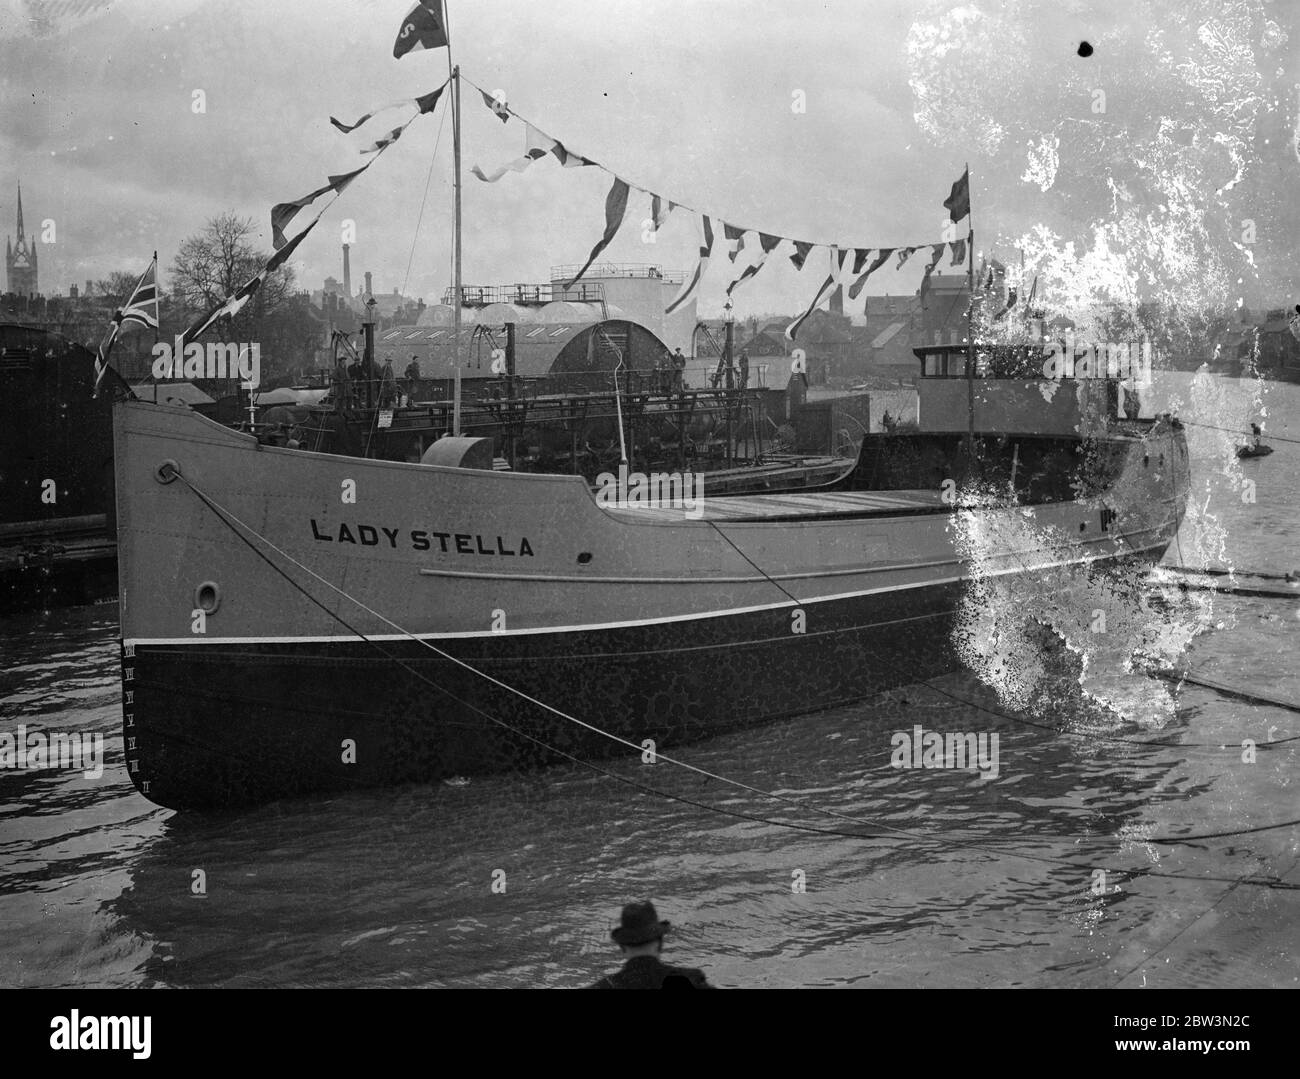 260 ton motor ship launched broadside at Faversham . The Lady Stalls , a 260 ton cargo capacity motor coaster , was launched broadside into a creek at Faversham , Kent . The shipbulding yard of Messrs . James Pollock , Sons and Co , ltd , is one of the few remainig shipyards of Britain where the broadside metho of launcing still prevails . Photo shows , the Lady Stella taking the water broadside with a mighty splash . 30 November 1935 Stock Photo